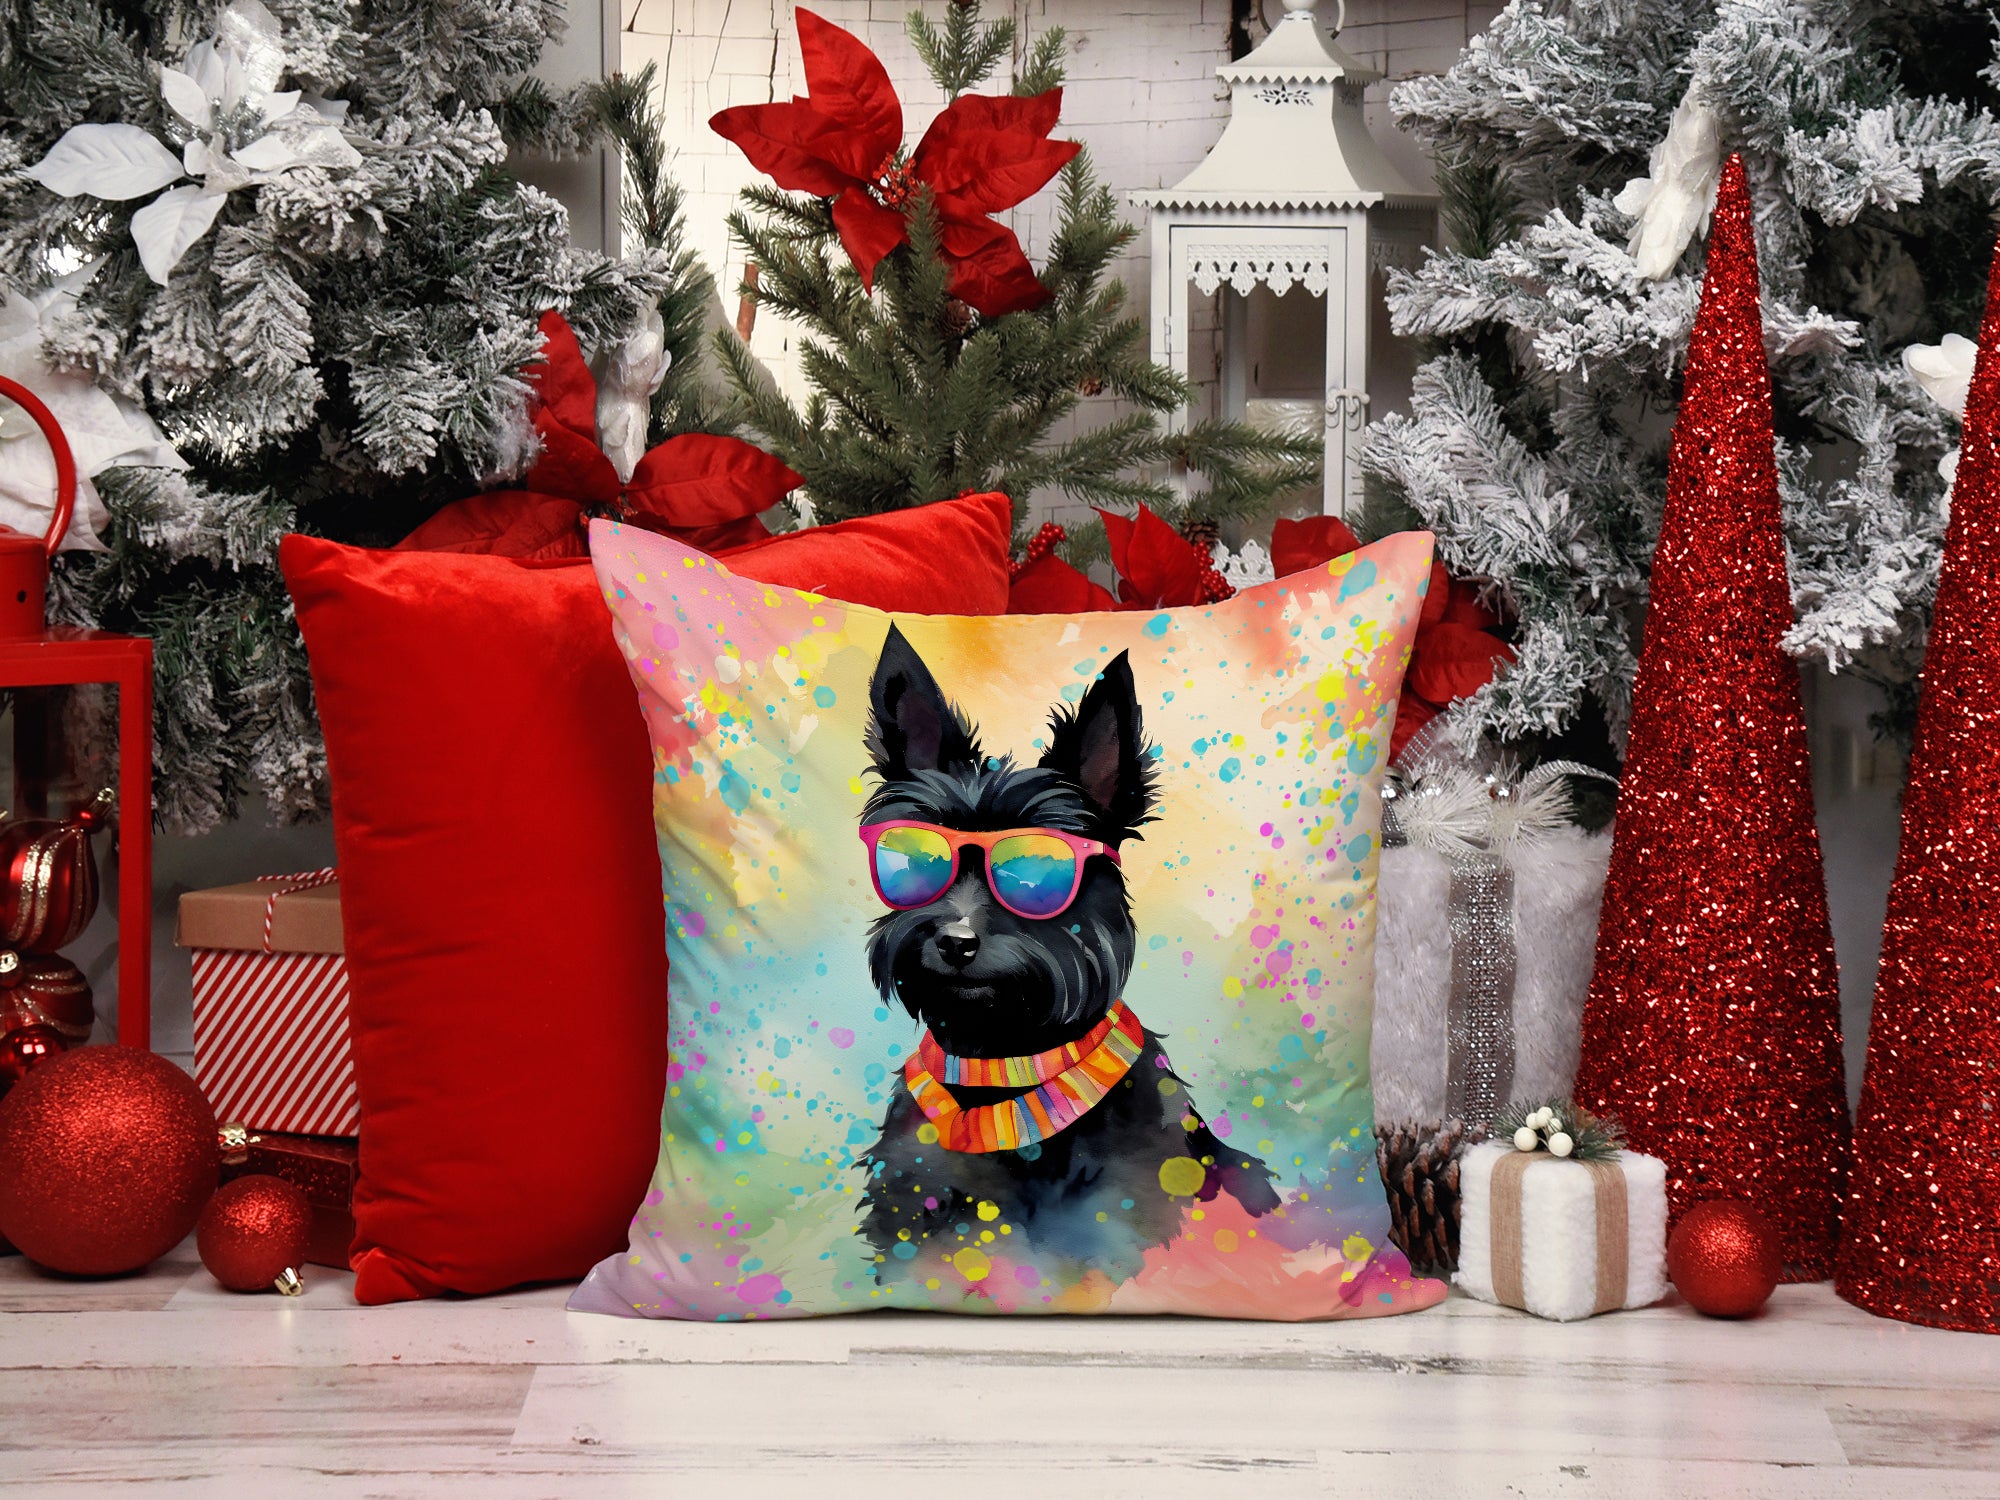 Buy this Scottish Terrier Hippie Dawg Fabric Decorative Pillow